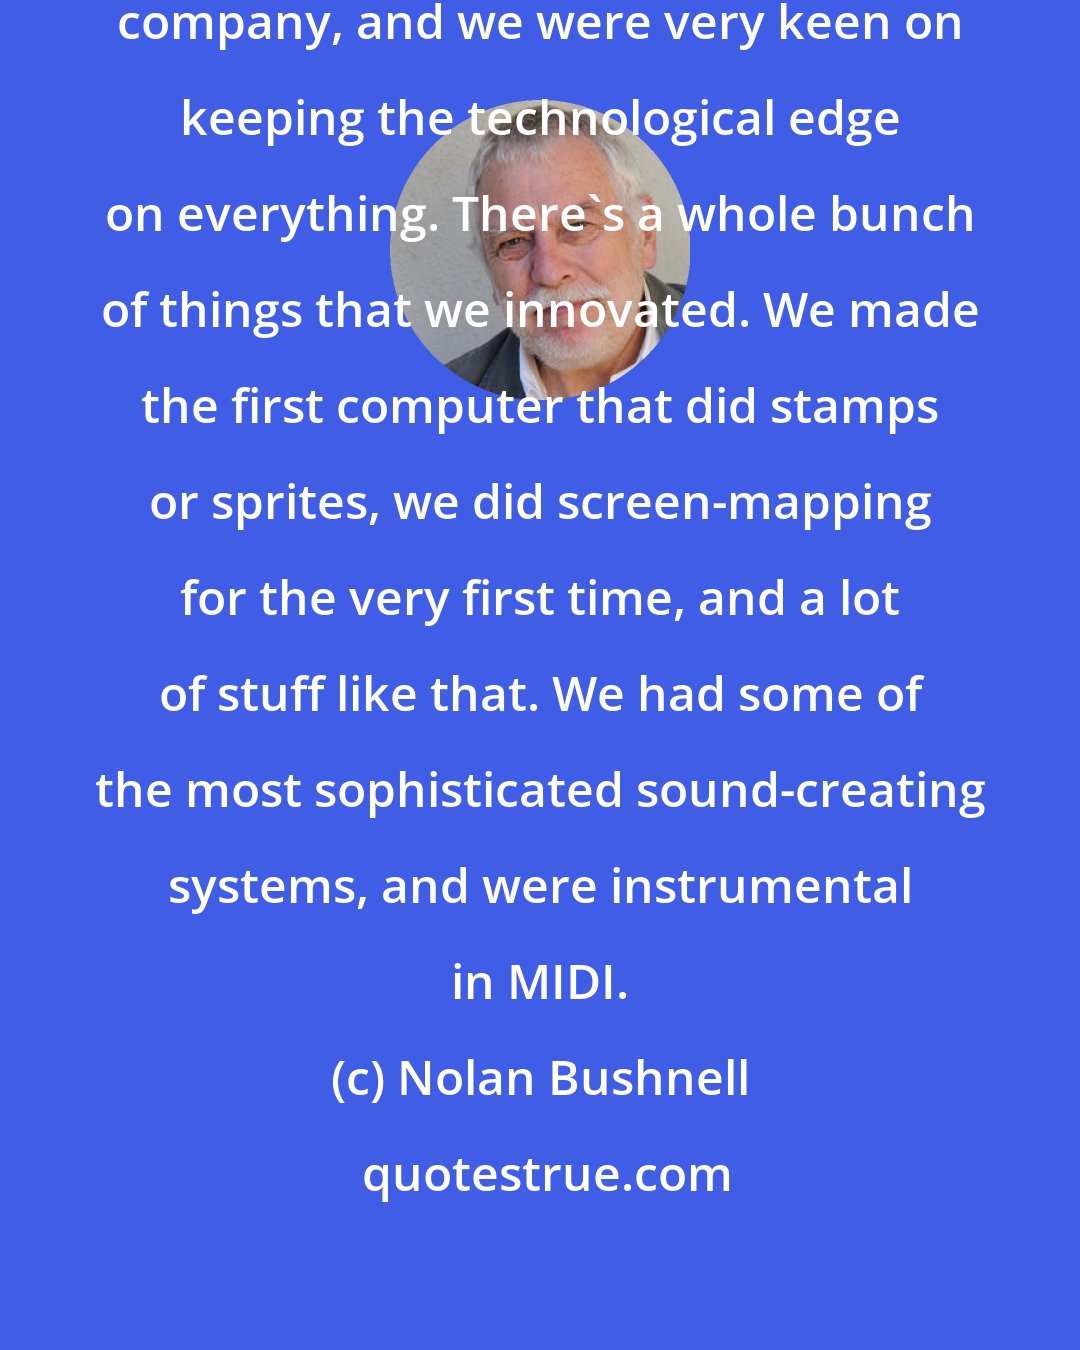 Nolan Bushnell: Atari always was a technology-driven company, and we were very keen on keeping the technological edge on everything. There's a whole bunch of things that we innovated. We made the first computer that did stamps or sprites, we did screen-mapping for the very first time, and a lot of stuff like that. We had some of the most sophisticated sound-creating systems, and were instrumental in MIDI.